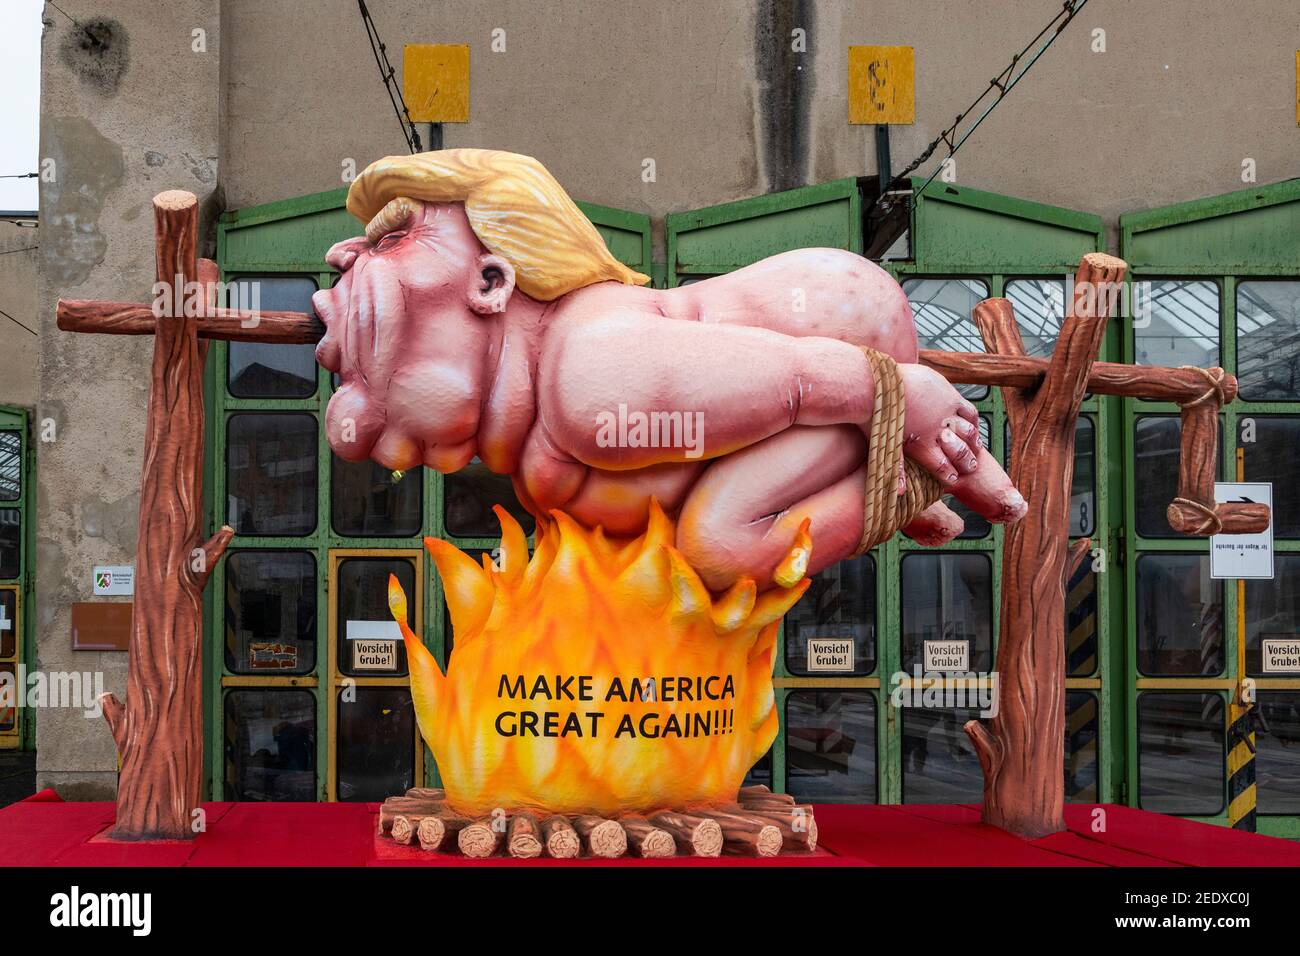 Dusseldorf, Germany. 15 February 2021. Donald Trump - Make America Great Again. Carnival floats created by German artist Jacques Tilly were presented and later exhibited throughout Dusseldorf as the main carnival parade was cancelled due to the coronavirus pandemic. Credit: Bettina Strenske/Alamy Live News Stock Photo